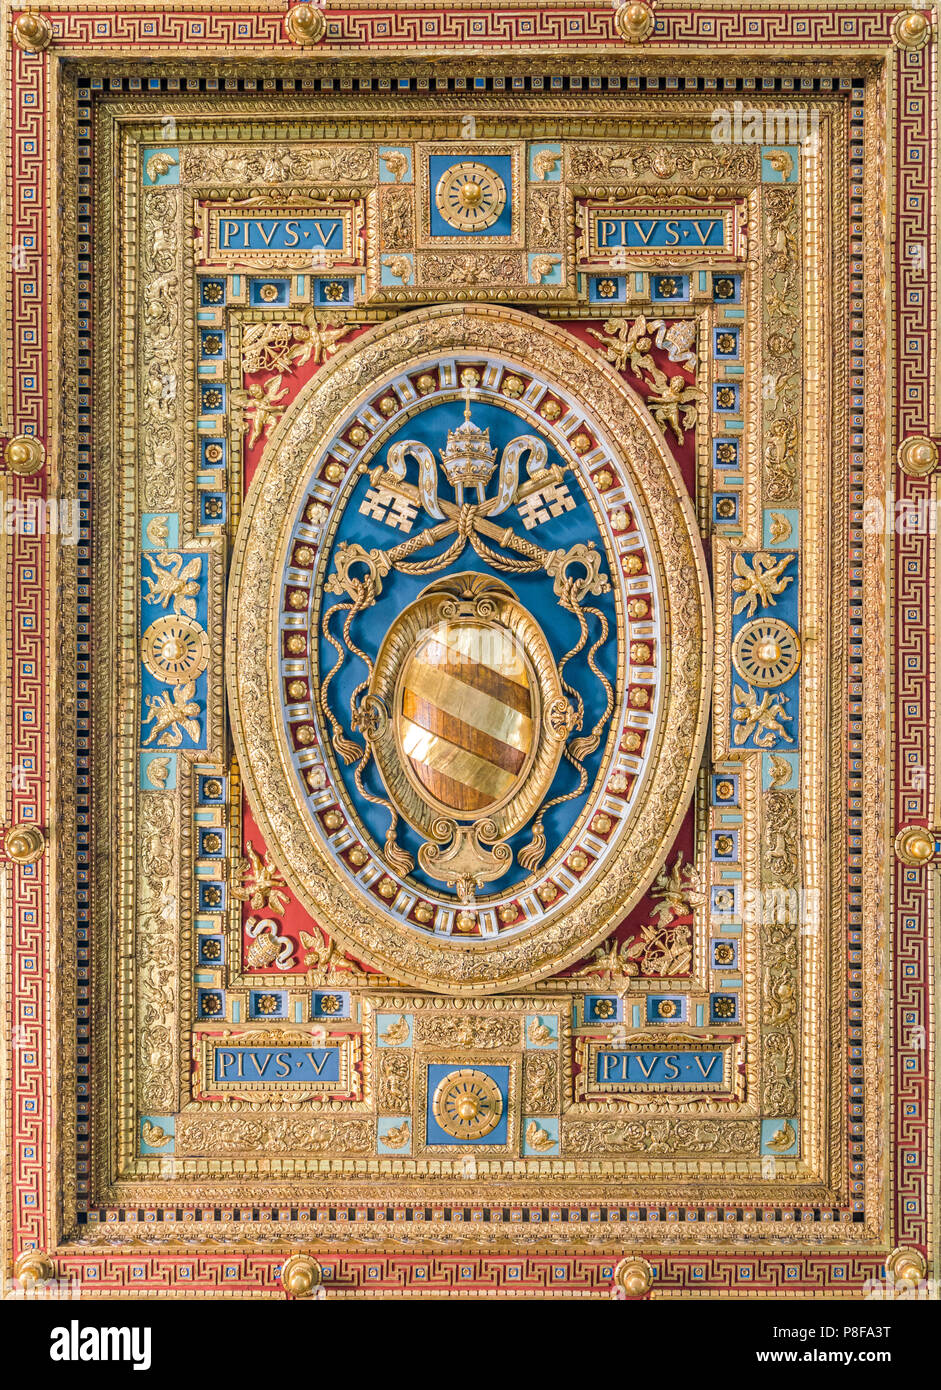 Pope Pius V coat of arms in the Basilica of Saint John Lateran in Rome. Stock Photo